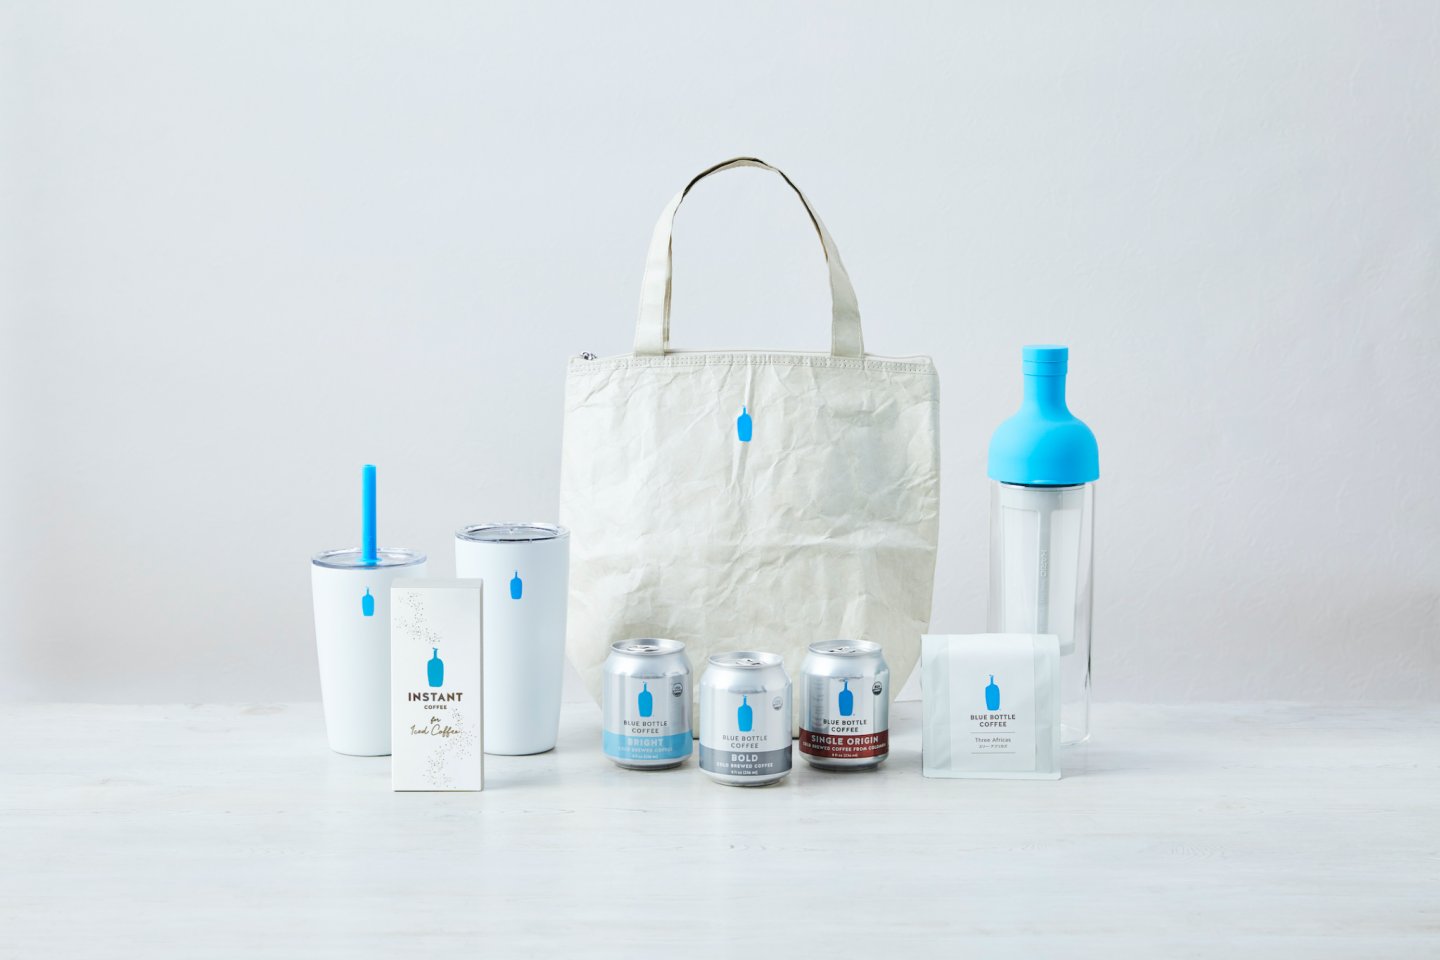 The pop-up shop will offer a range of Blue Bottle themed products, including cold brew cans and travel cups